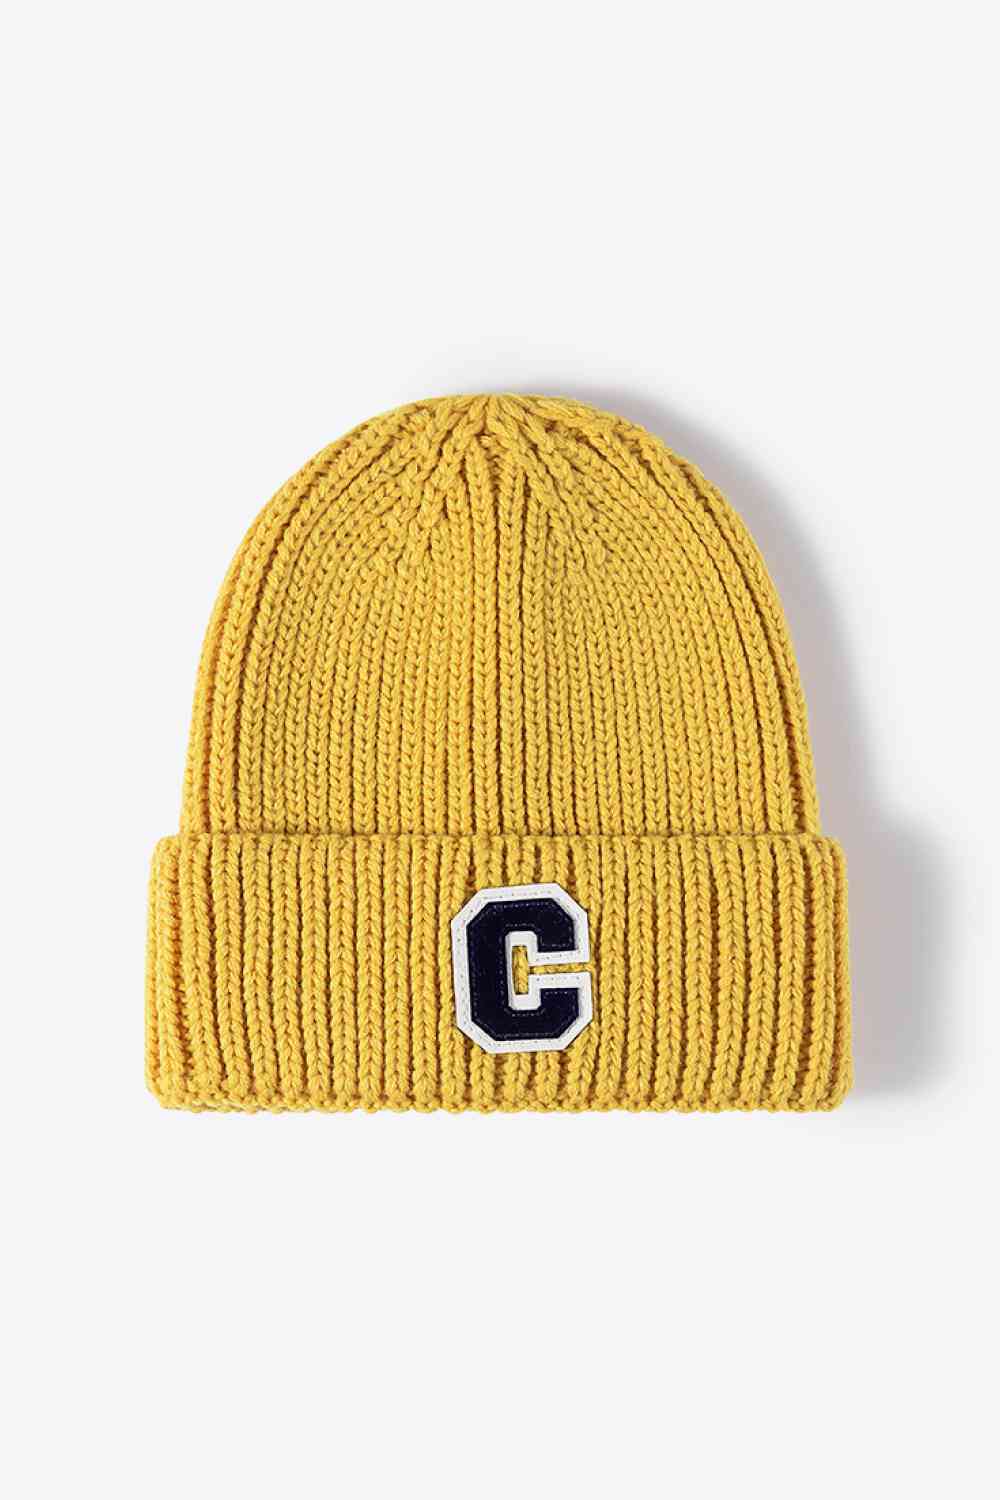 Letter C Patch Cuffed Beanie Yellow One Size